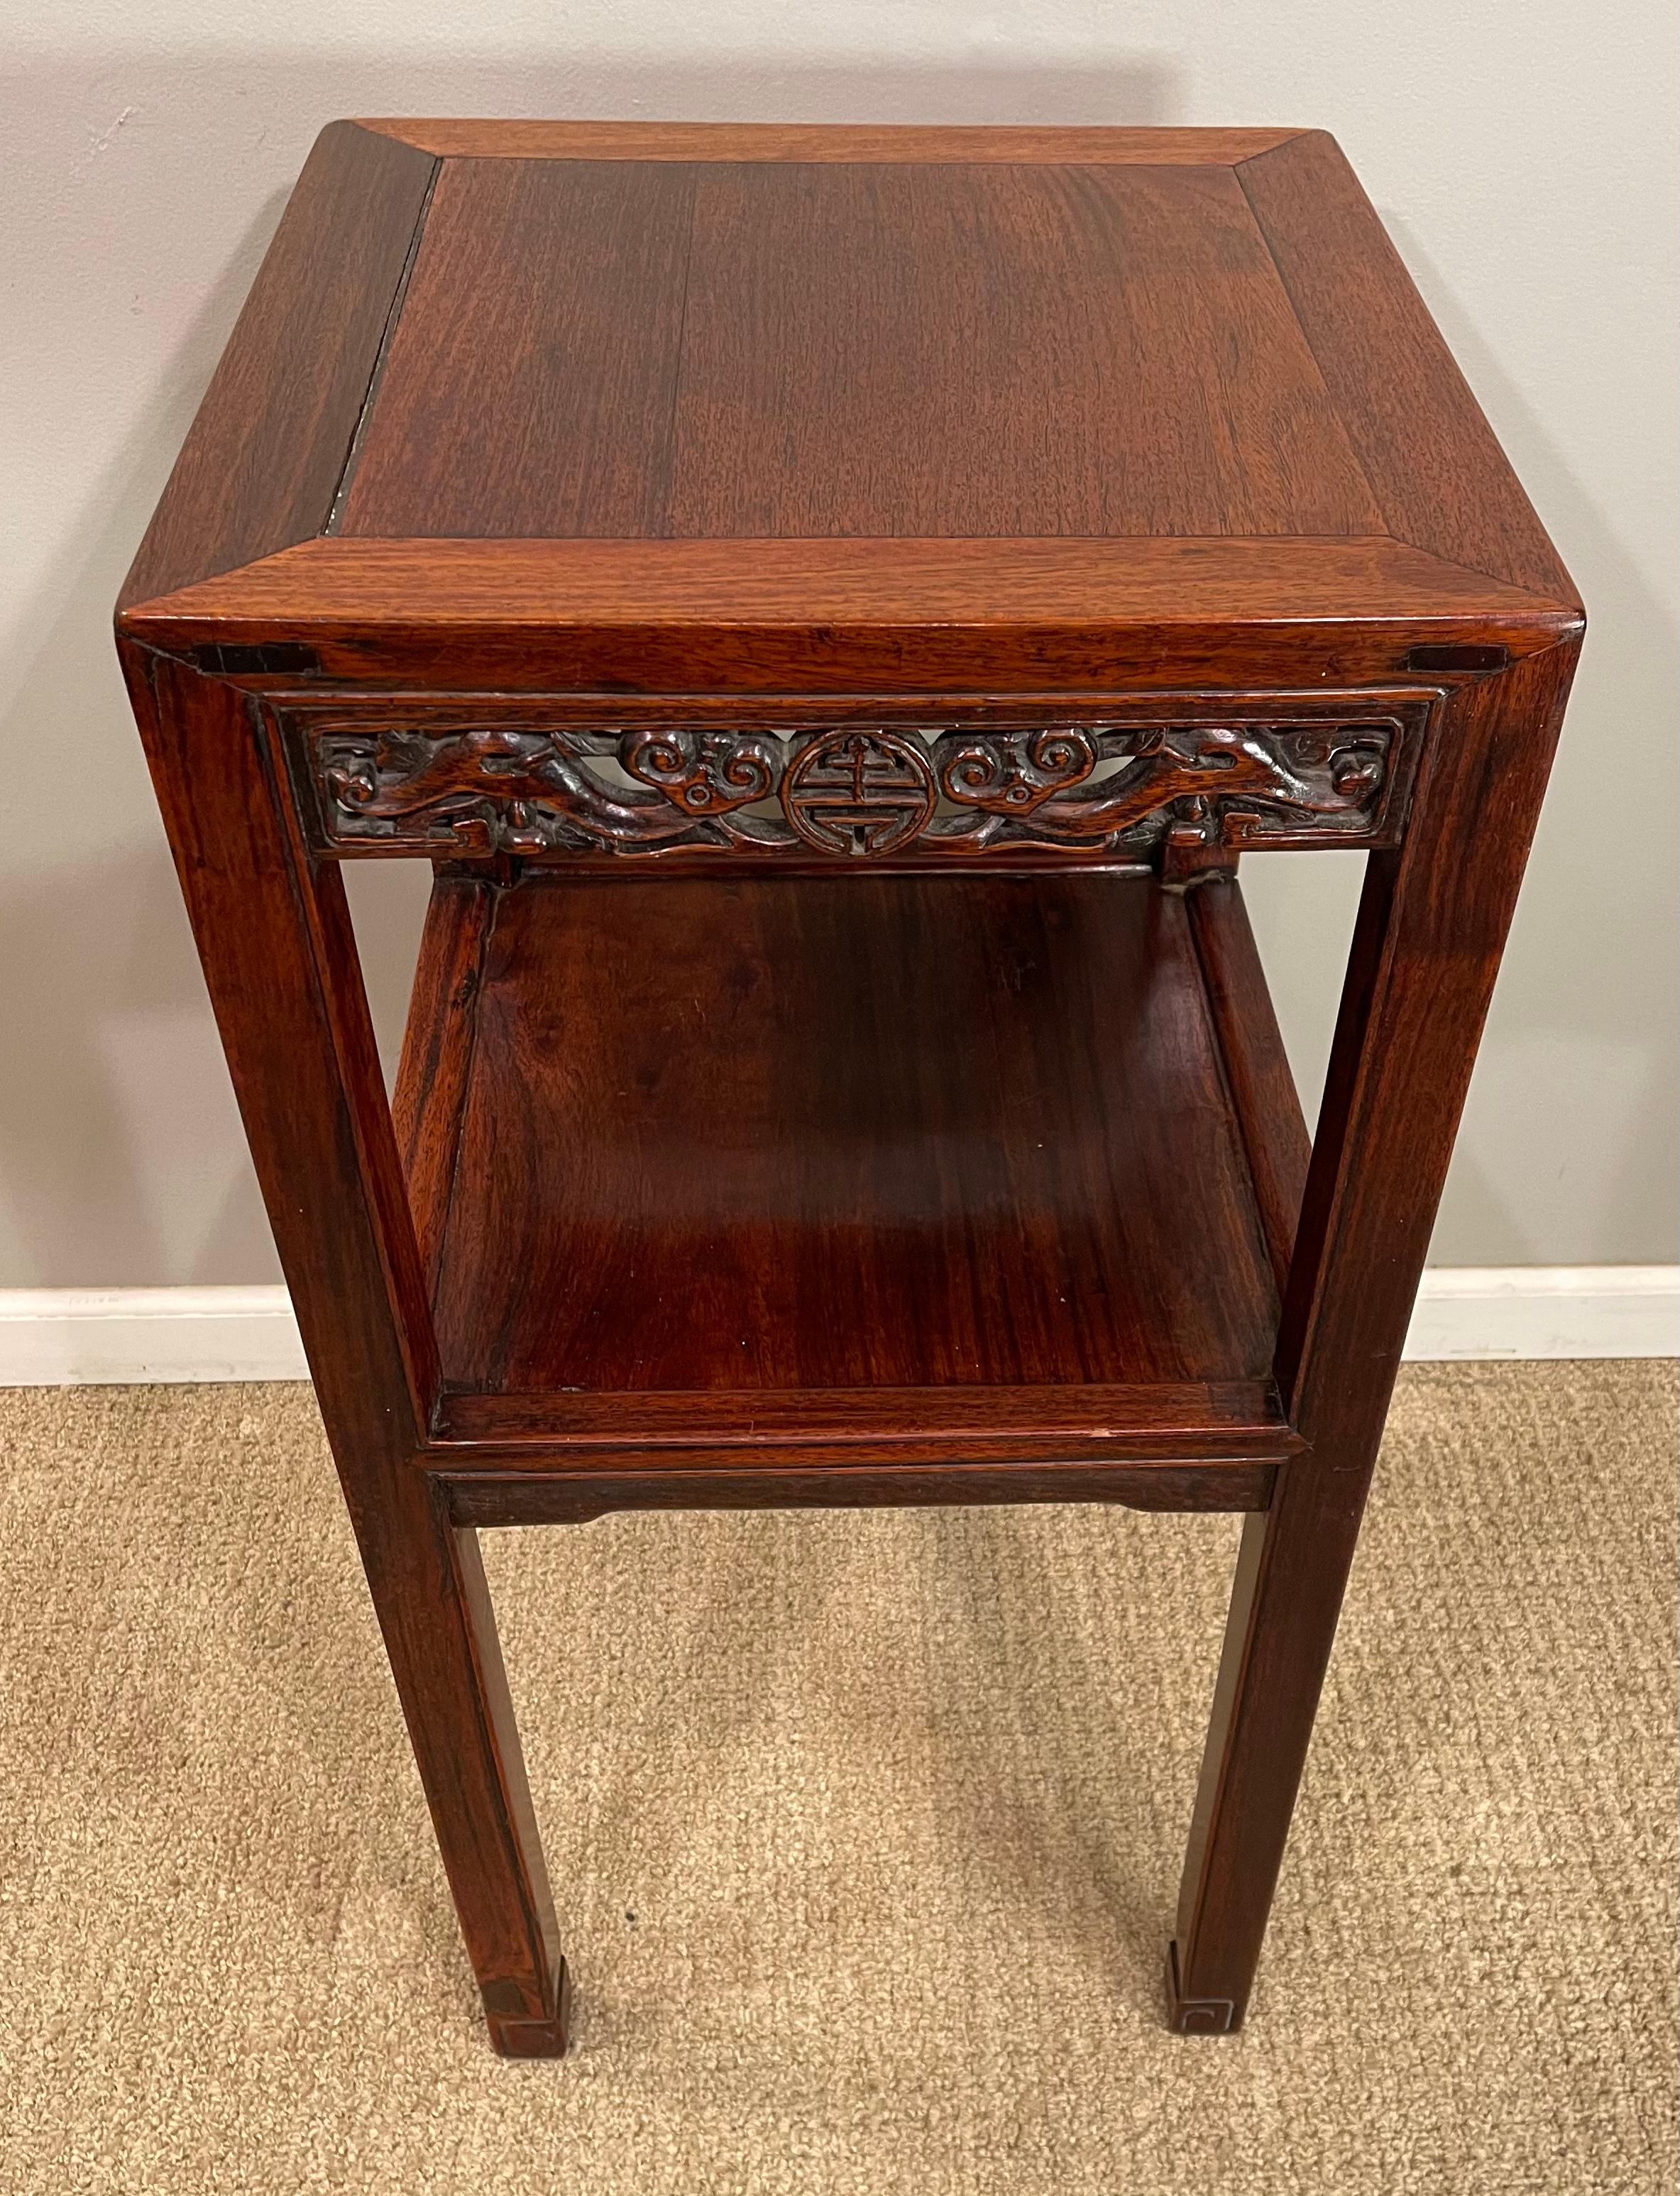 Polished Chinese Hardwood 'Hungmu' Tea Table, Late 19th Century / Early 20th Century For Sale